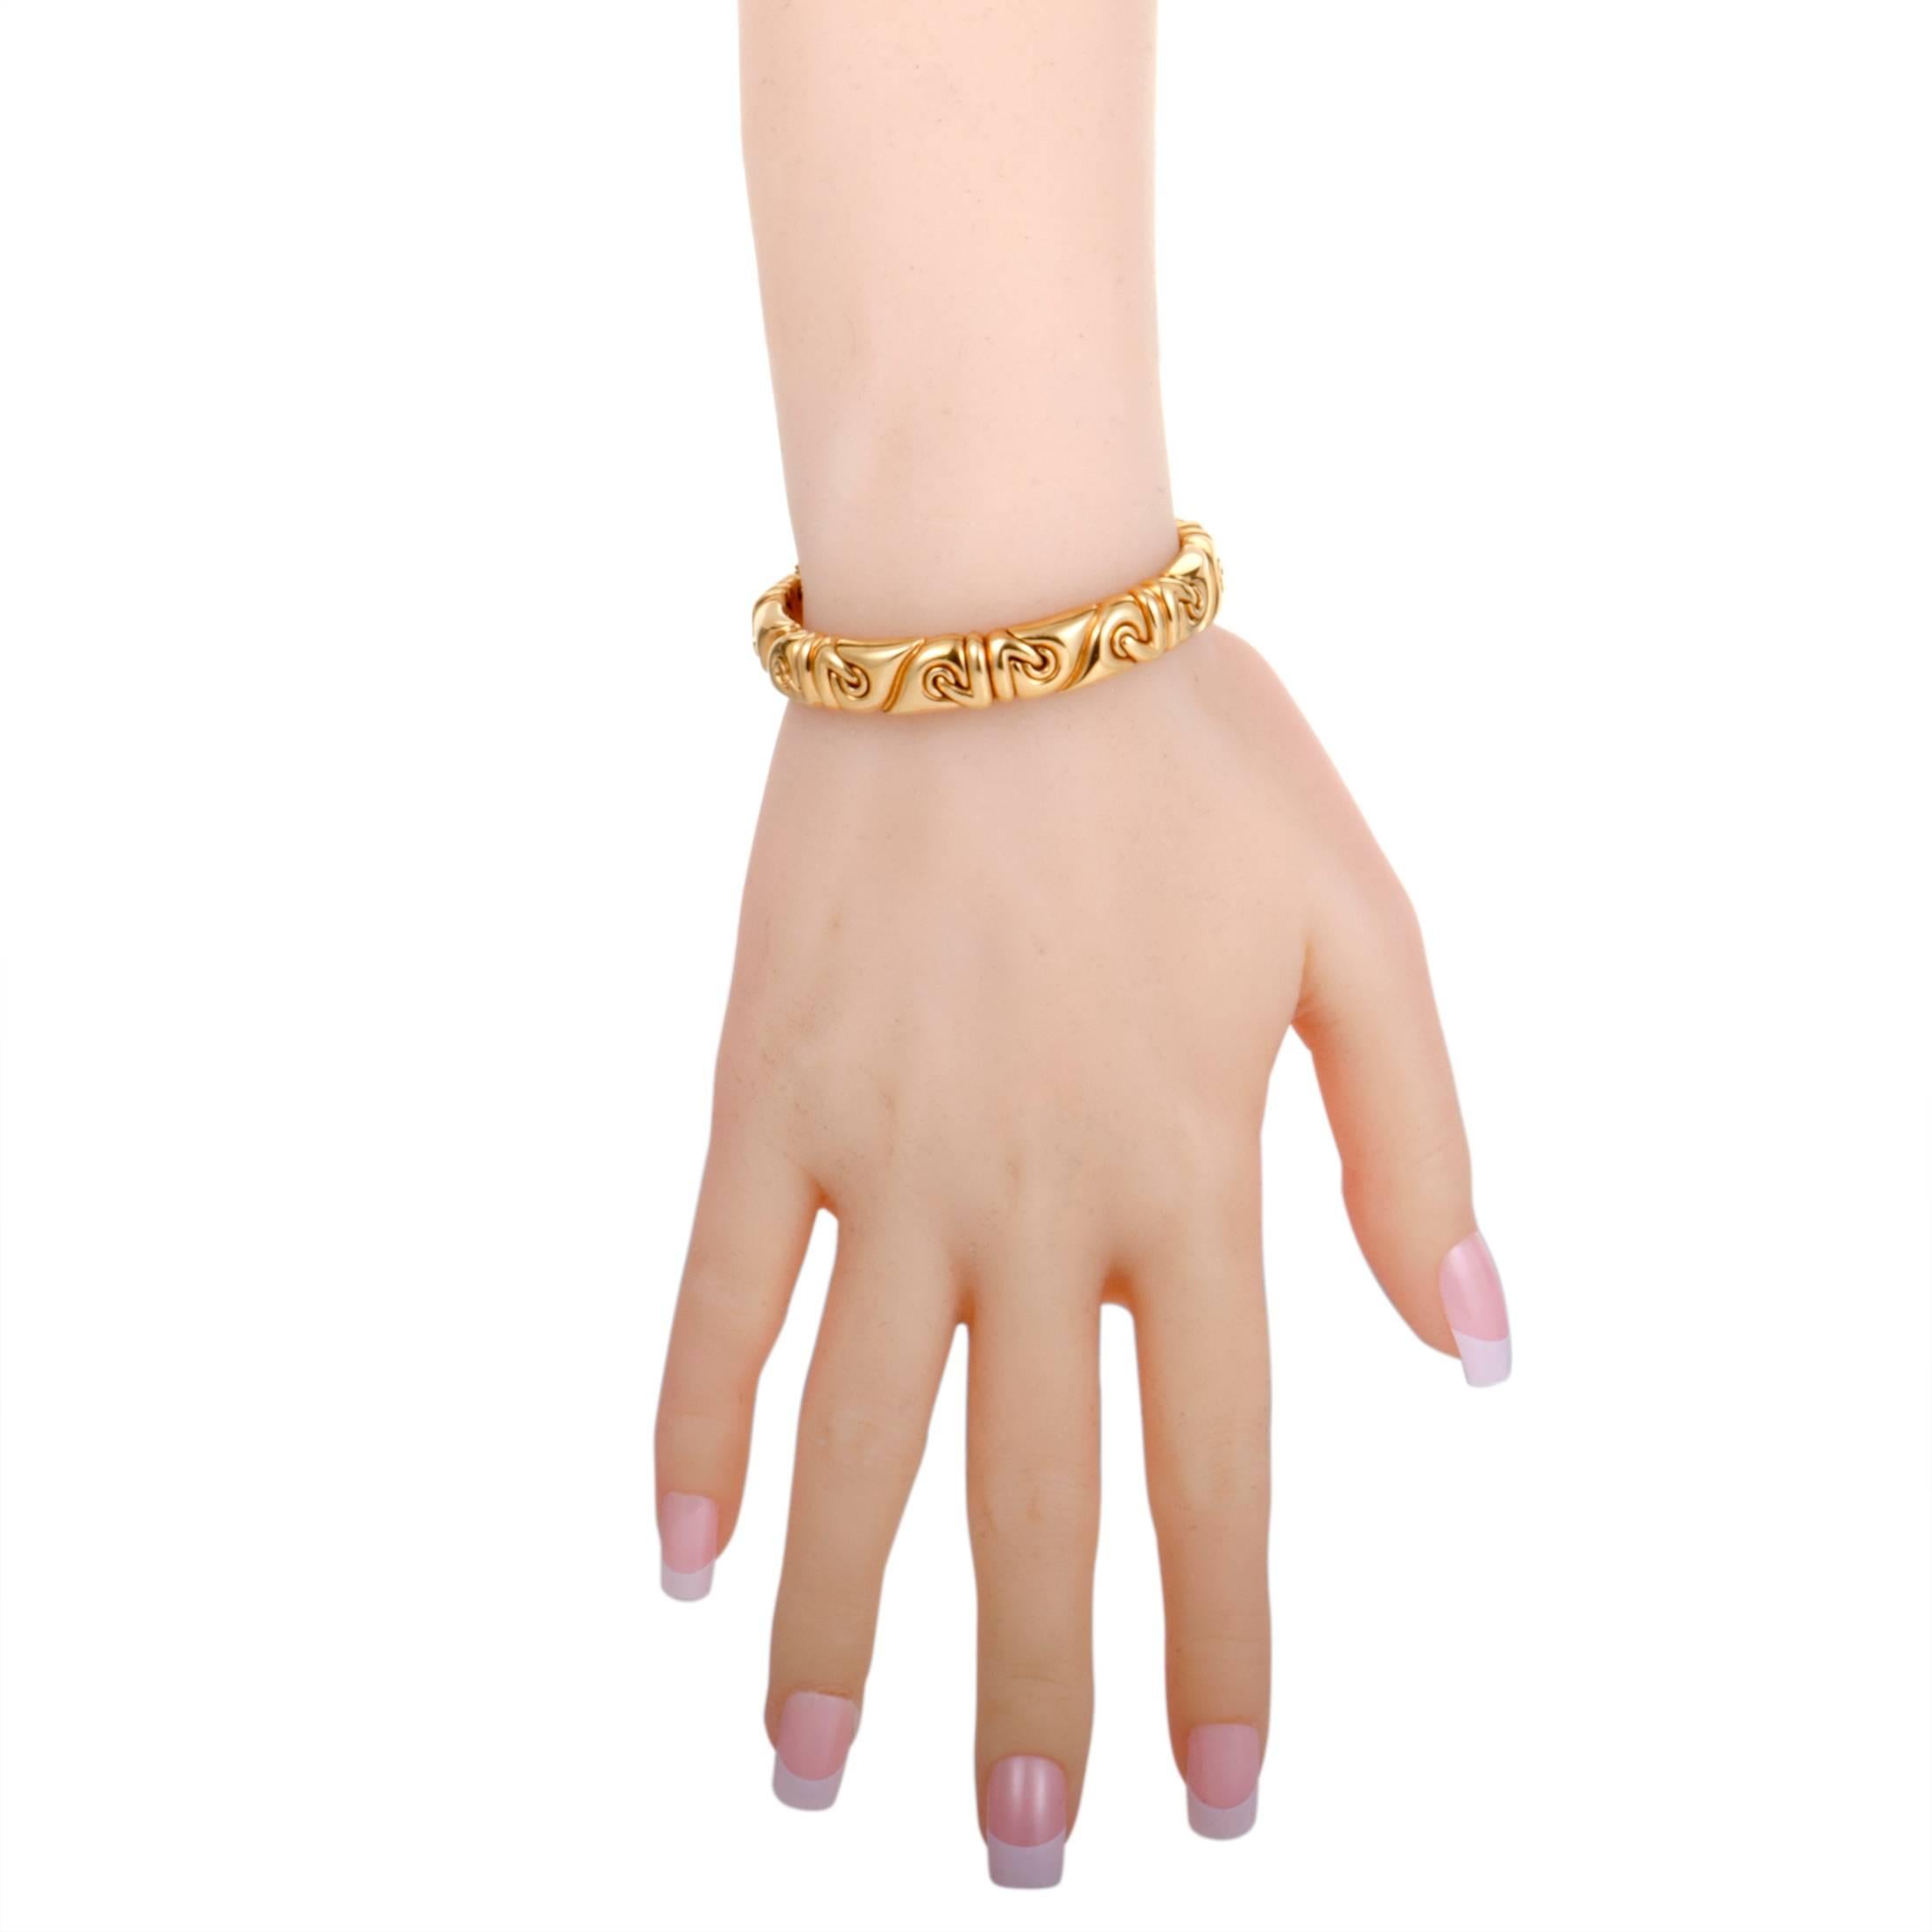 A design that exudes classy elegance is beautifully presented in luxurious 18K yellow gold in this attractive bracelet that is created by Bulgari and weighs 64 grams.
Included Items: Manufacturer's Box